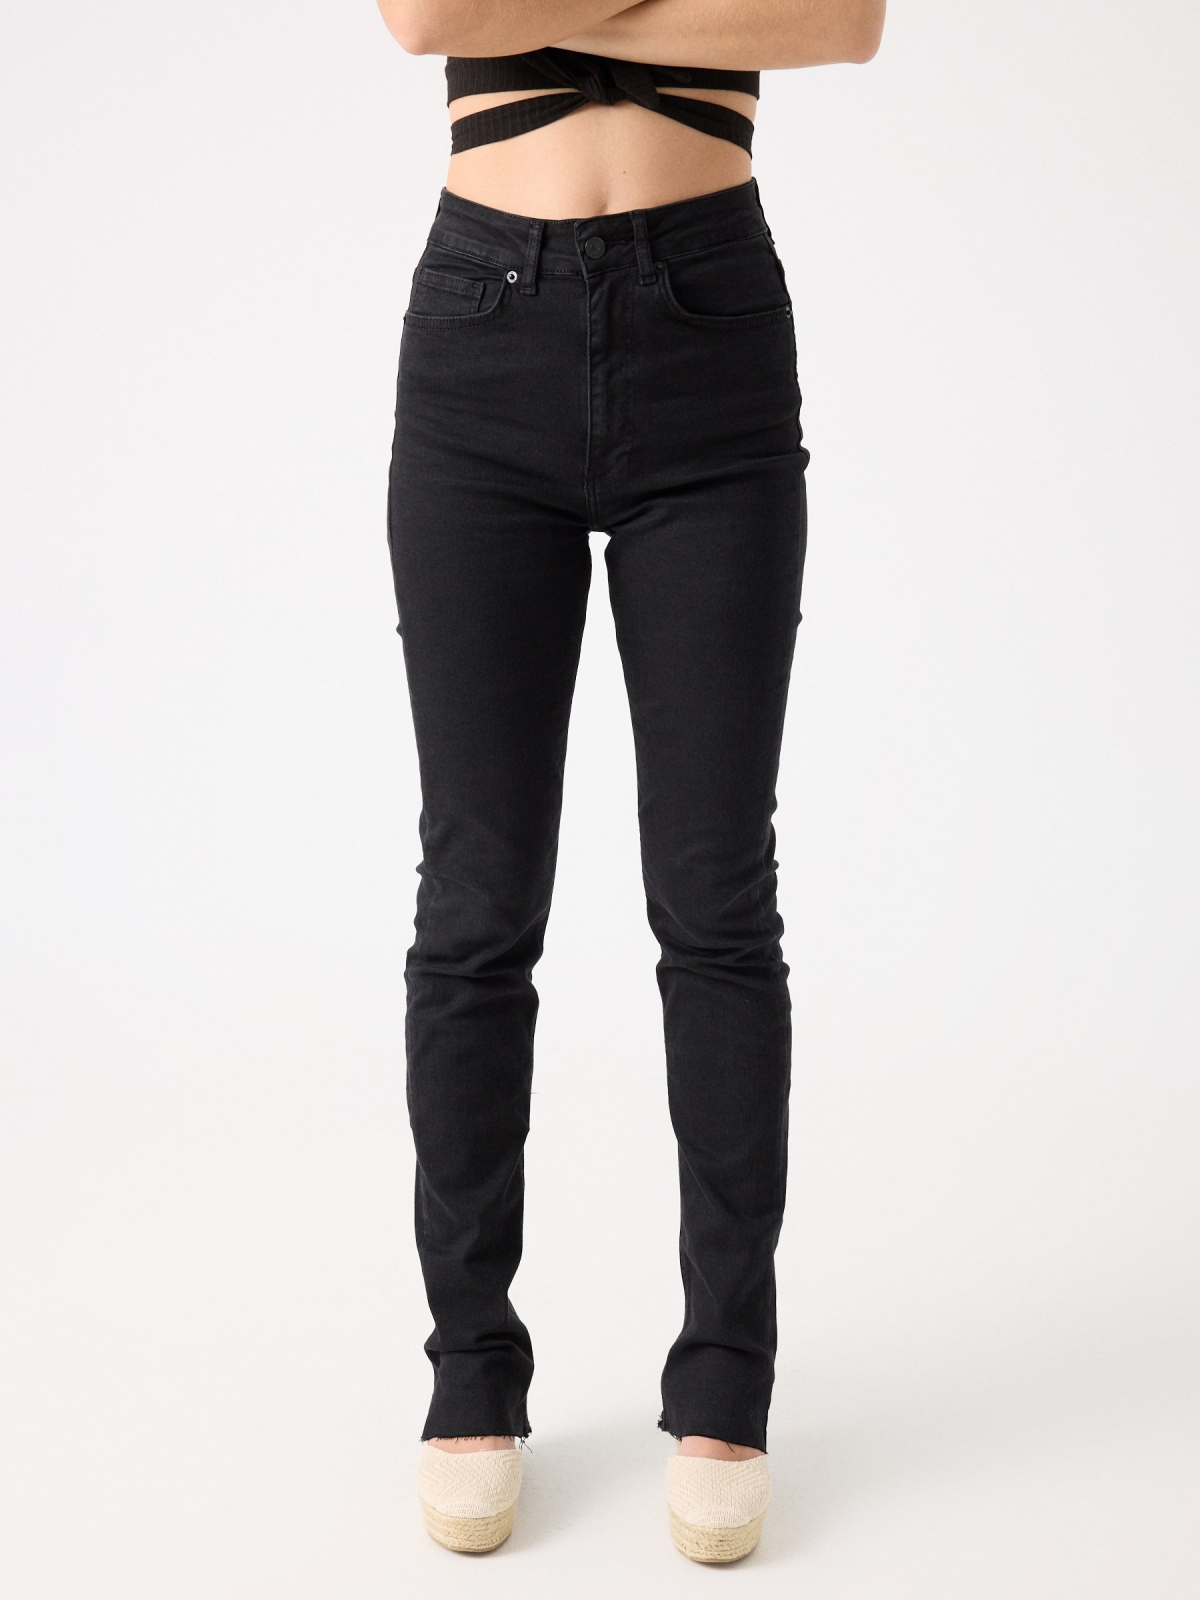 High waist black flared jeans black front view